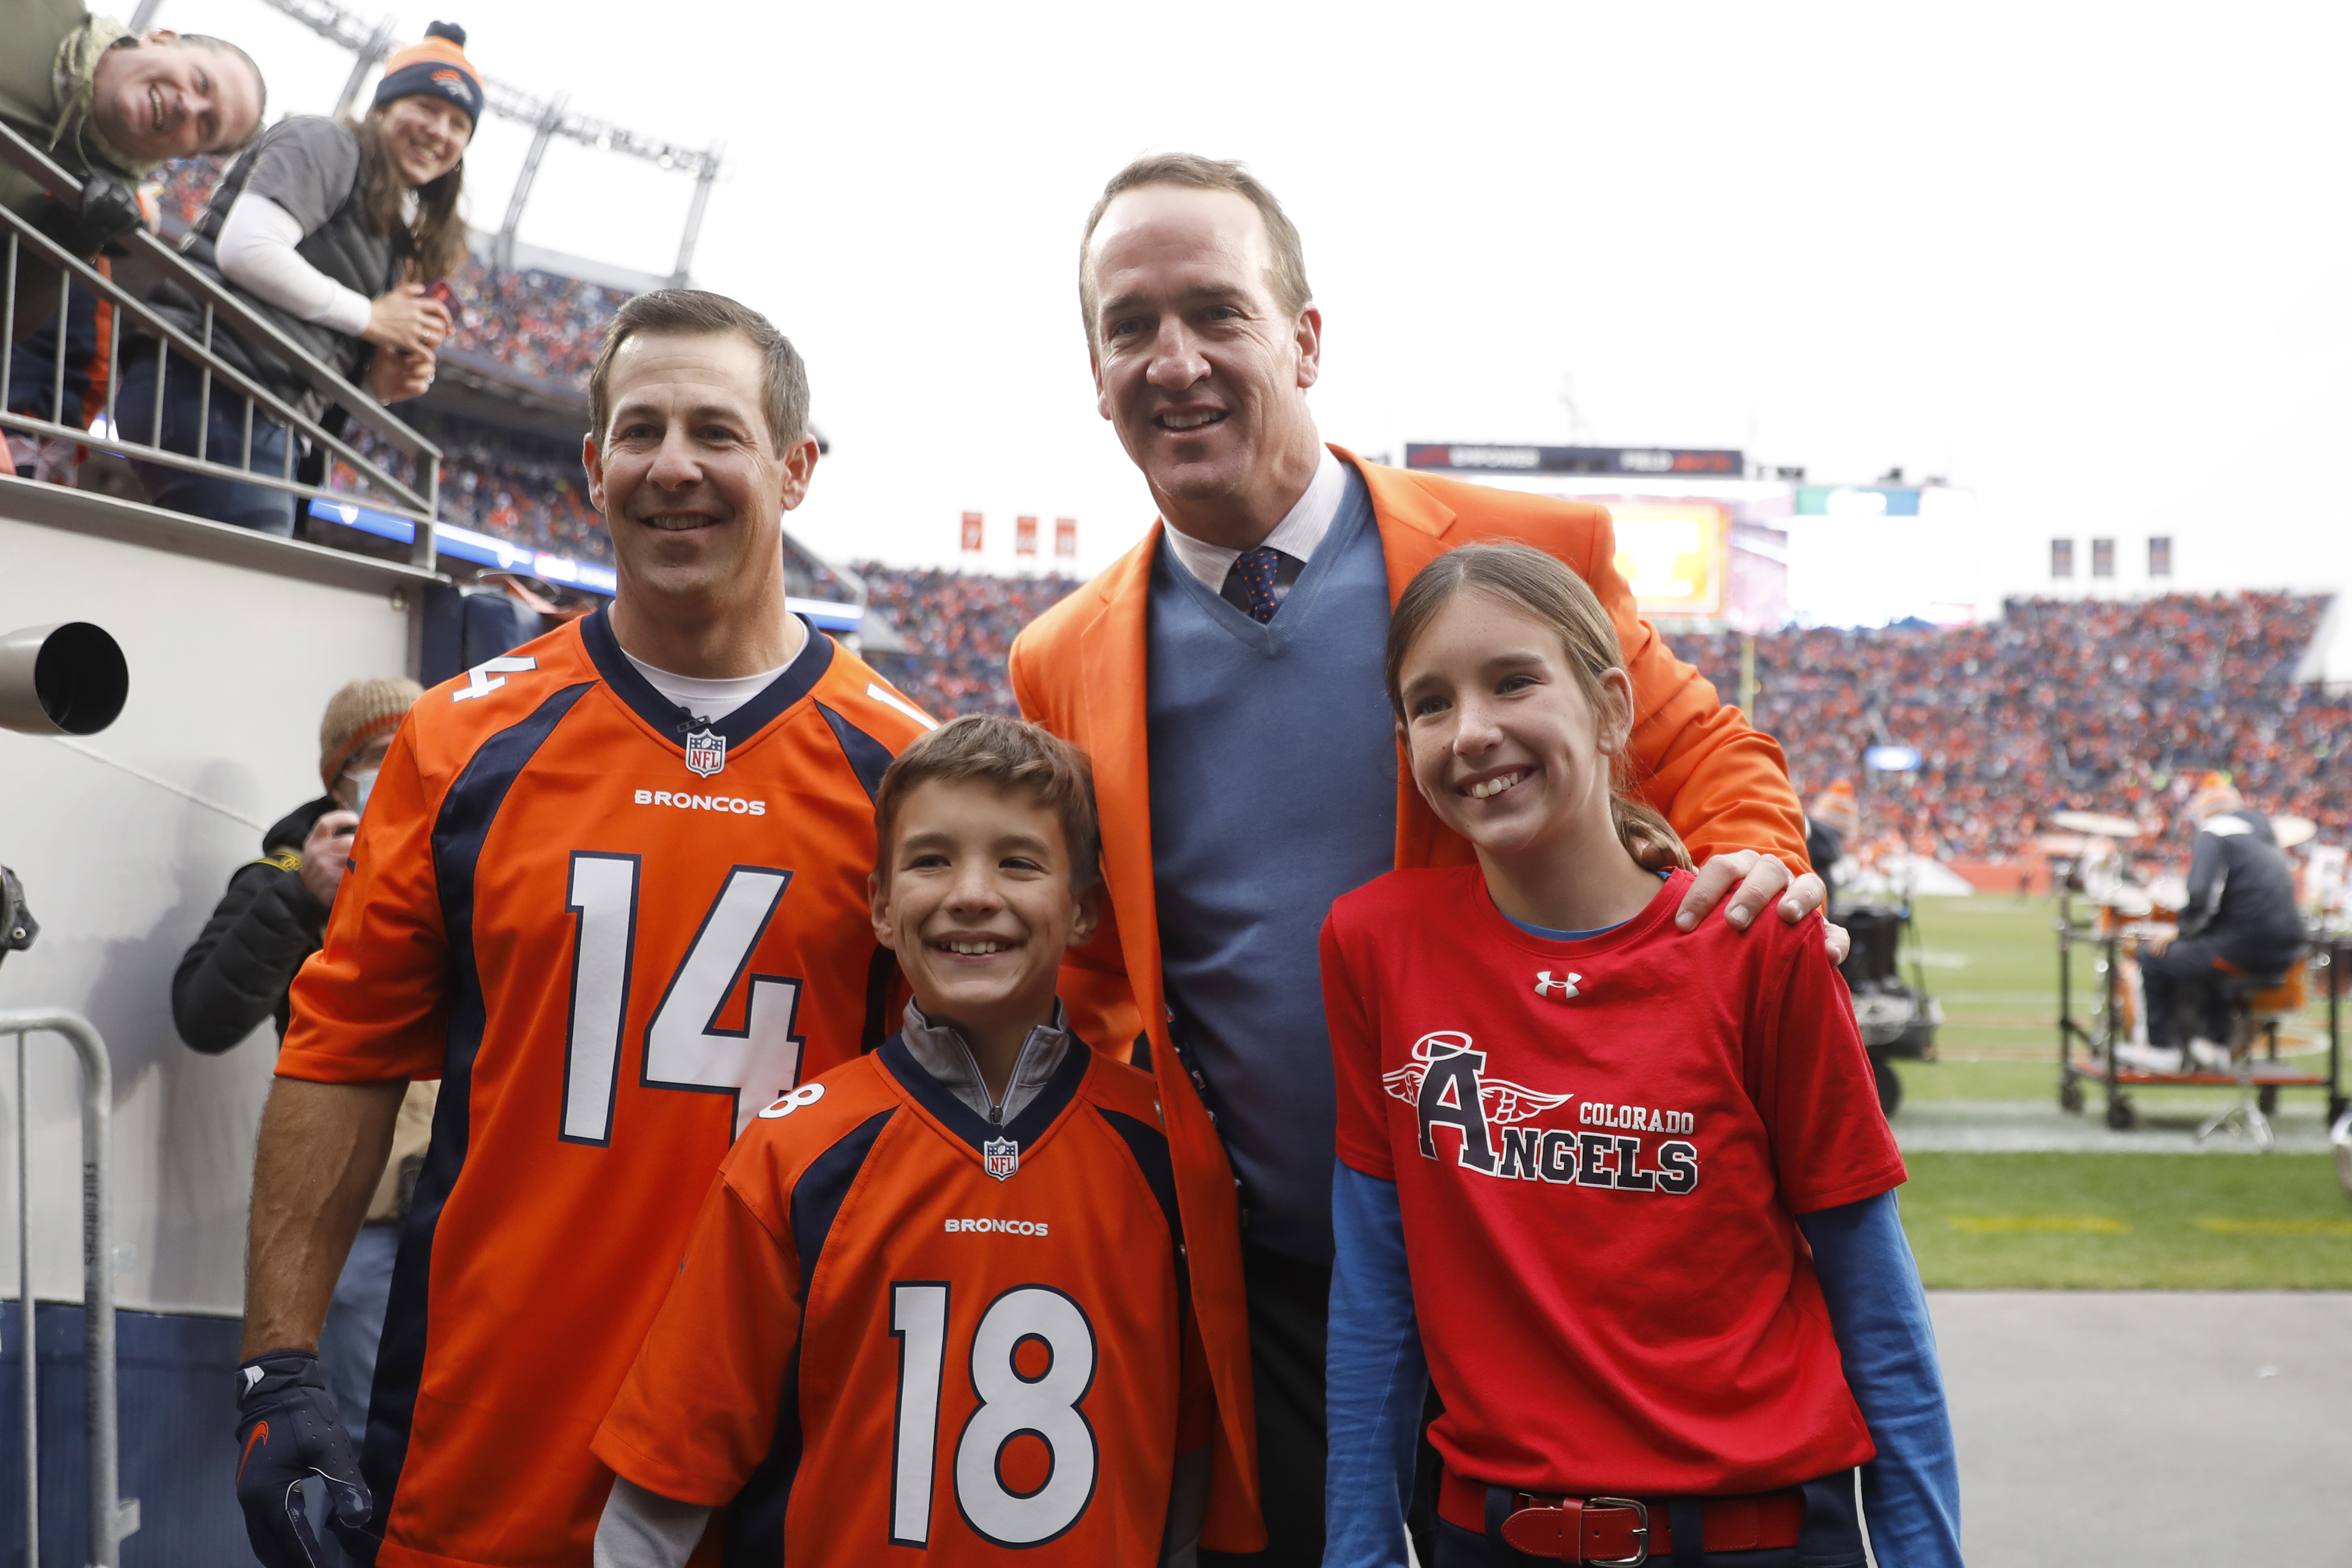 Brandon Stokely, Peyton Manning, Marshall Manning, and Mosley Manning pose for photos during a Ring of Honor induction ceremony at Empower Field At Mile High on October 31, 2021, in Denver, Colorado | Source: Getty Images